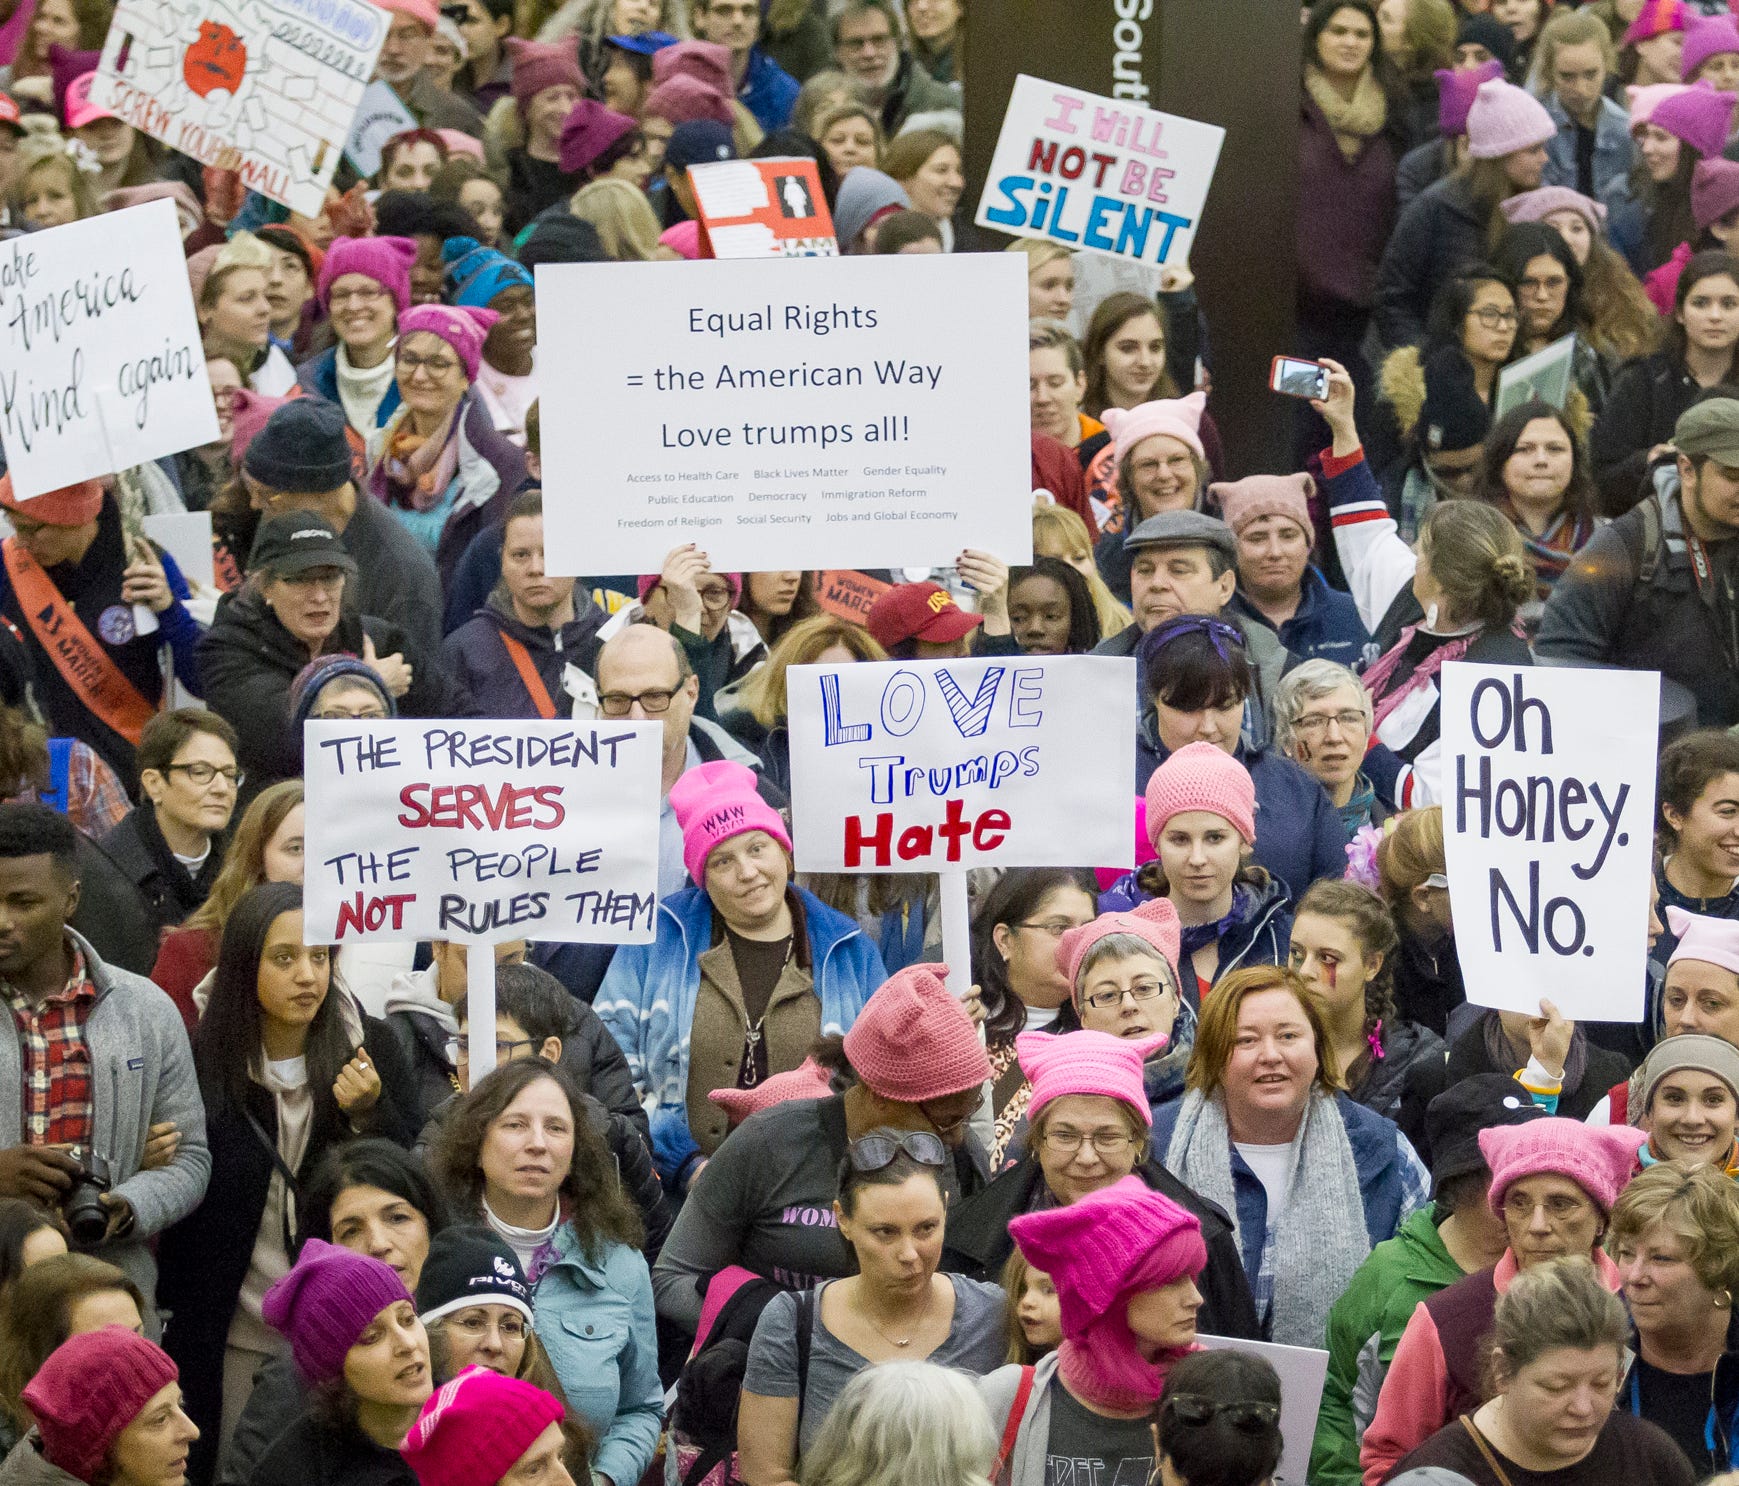 Marchers make their way through the Capital South Metro Station with hundreds of other marchers as they make their way to the Women's March on Washington in January.